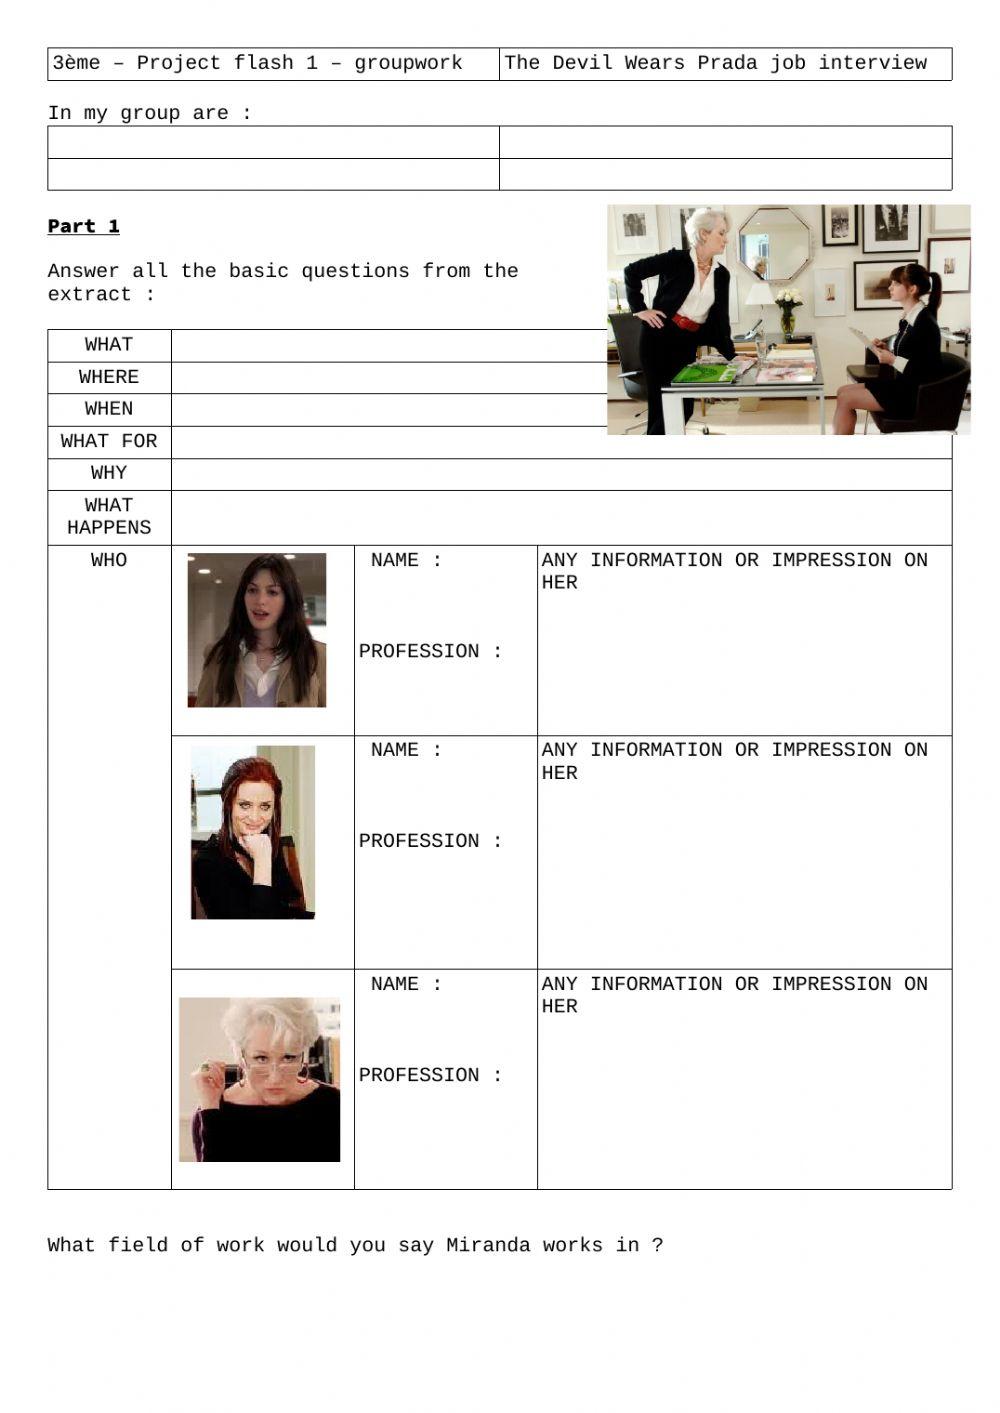 The job Interview, the Devil Wears Prada, open answers worksheet | Live  Worksheets